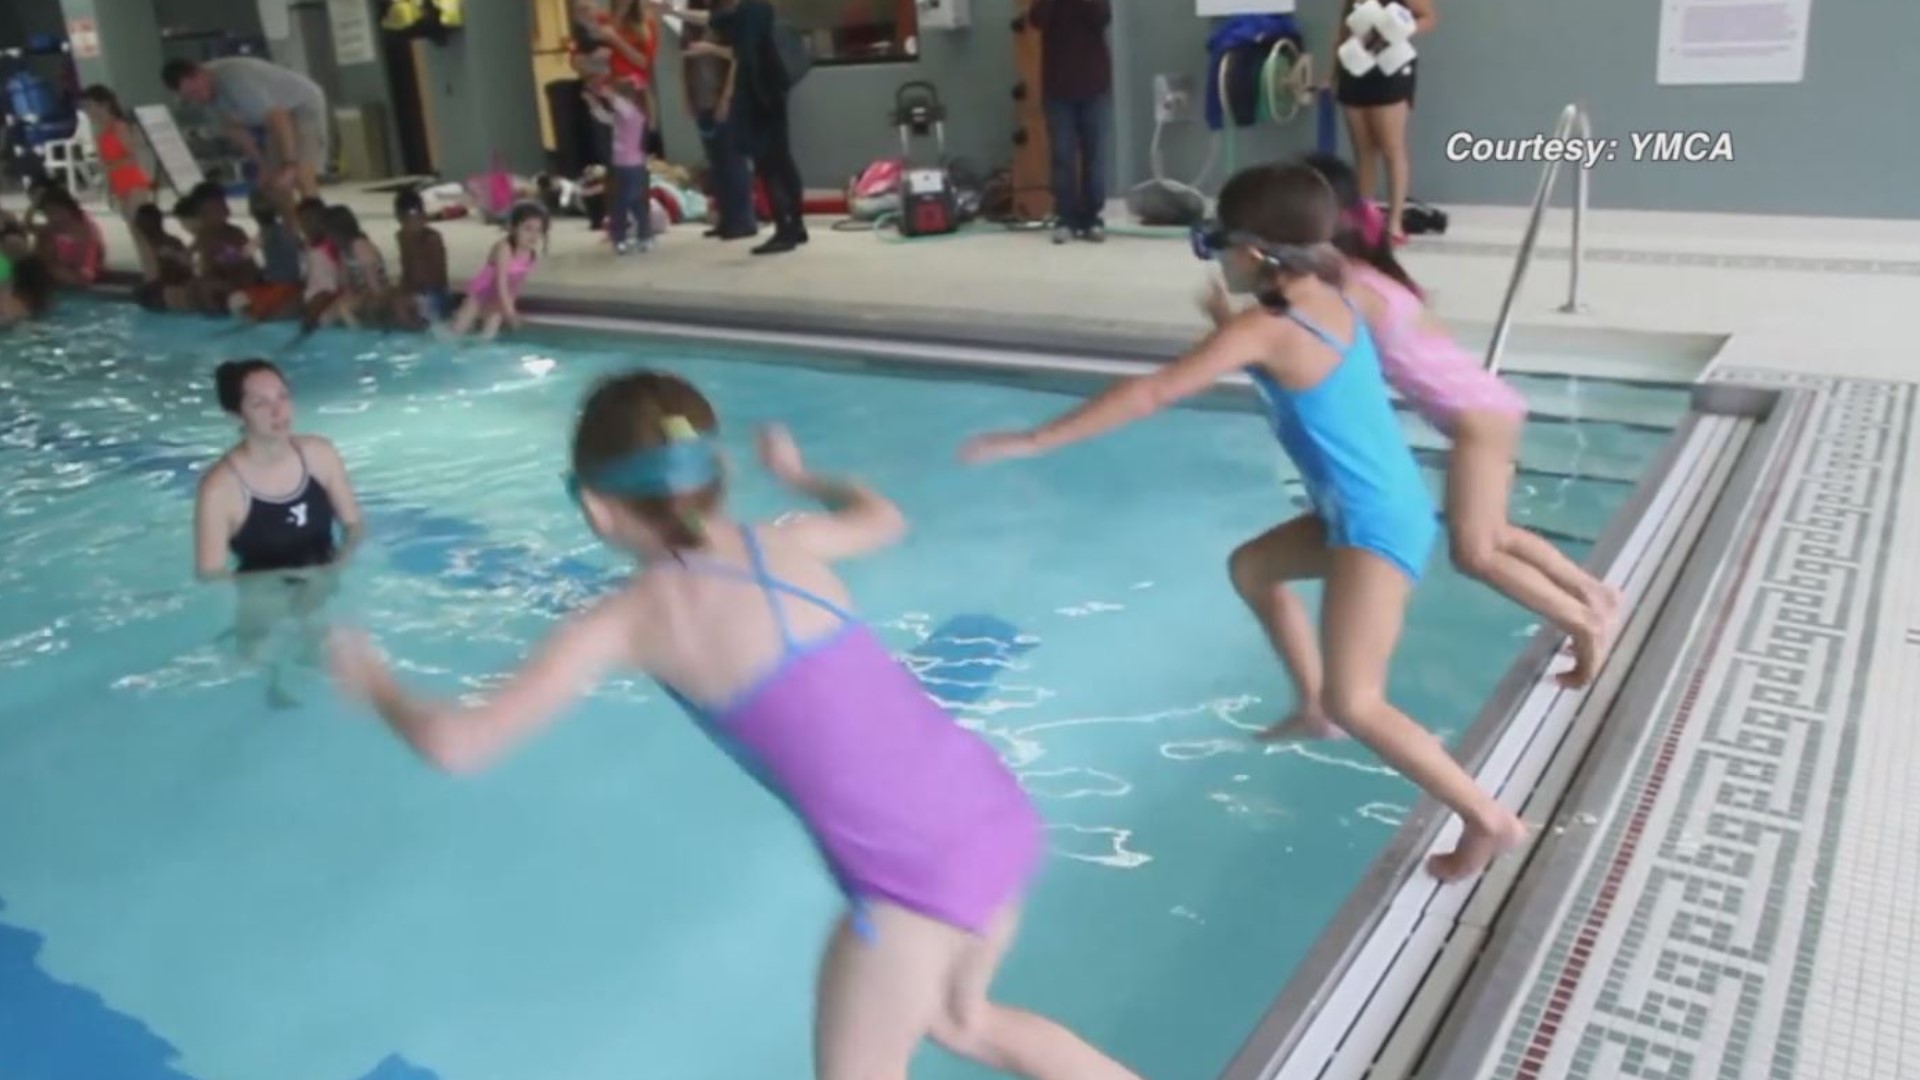 Many things stopped last summer in the thick of COVID-19, and that included swim lessons. To help keep kids safe this summer, one YMCA is offering free lessons.